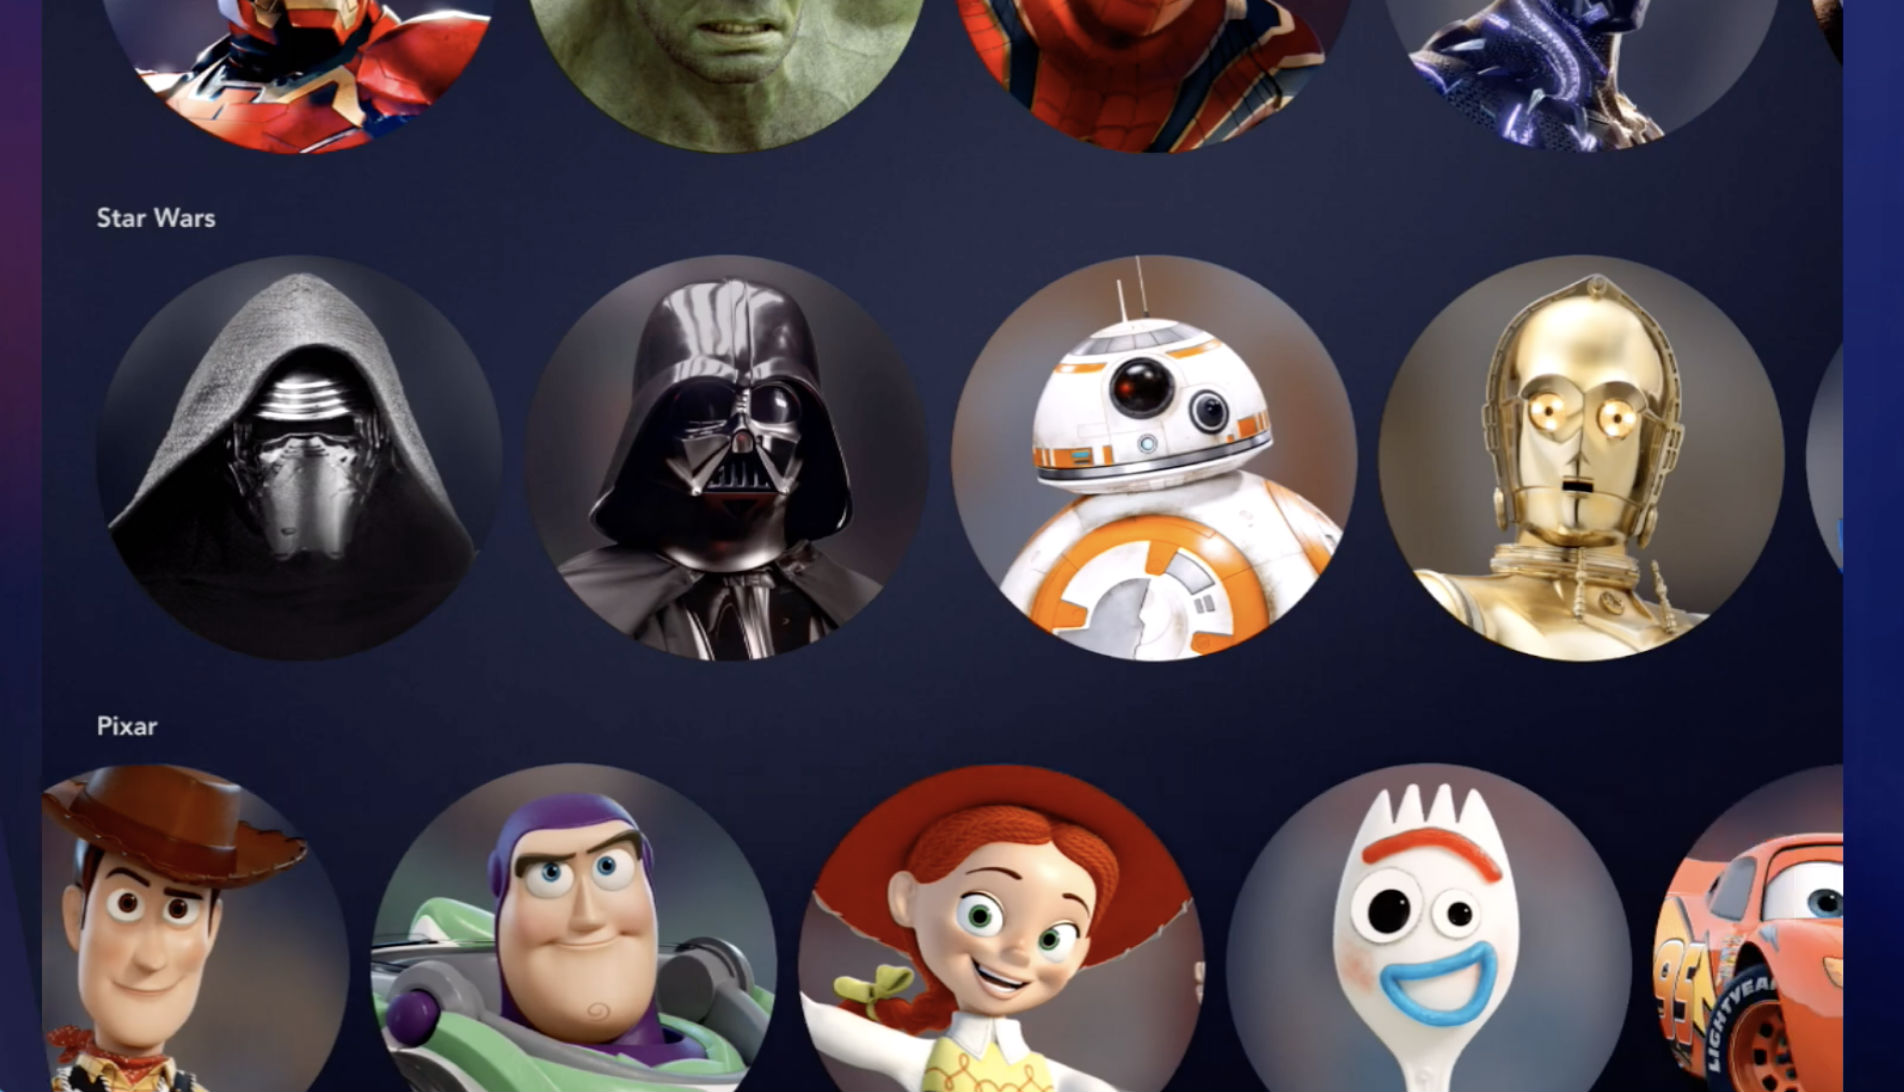 Disney+: Check Out Some Of The Avatars You Can Use In The Streaming Service